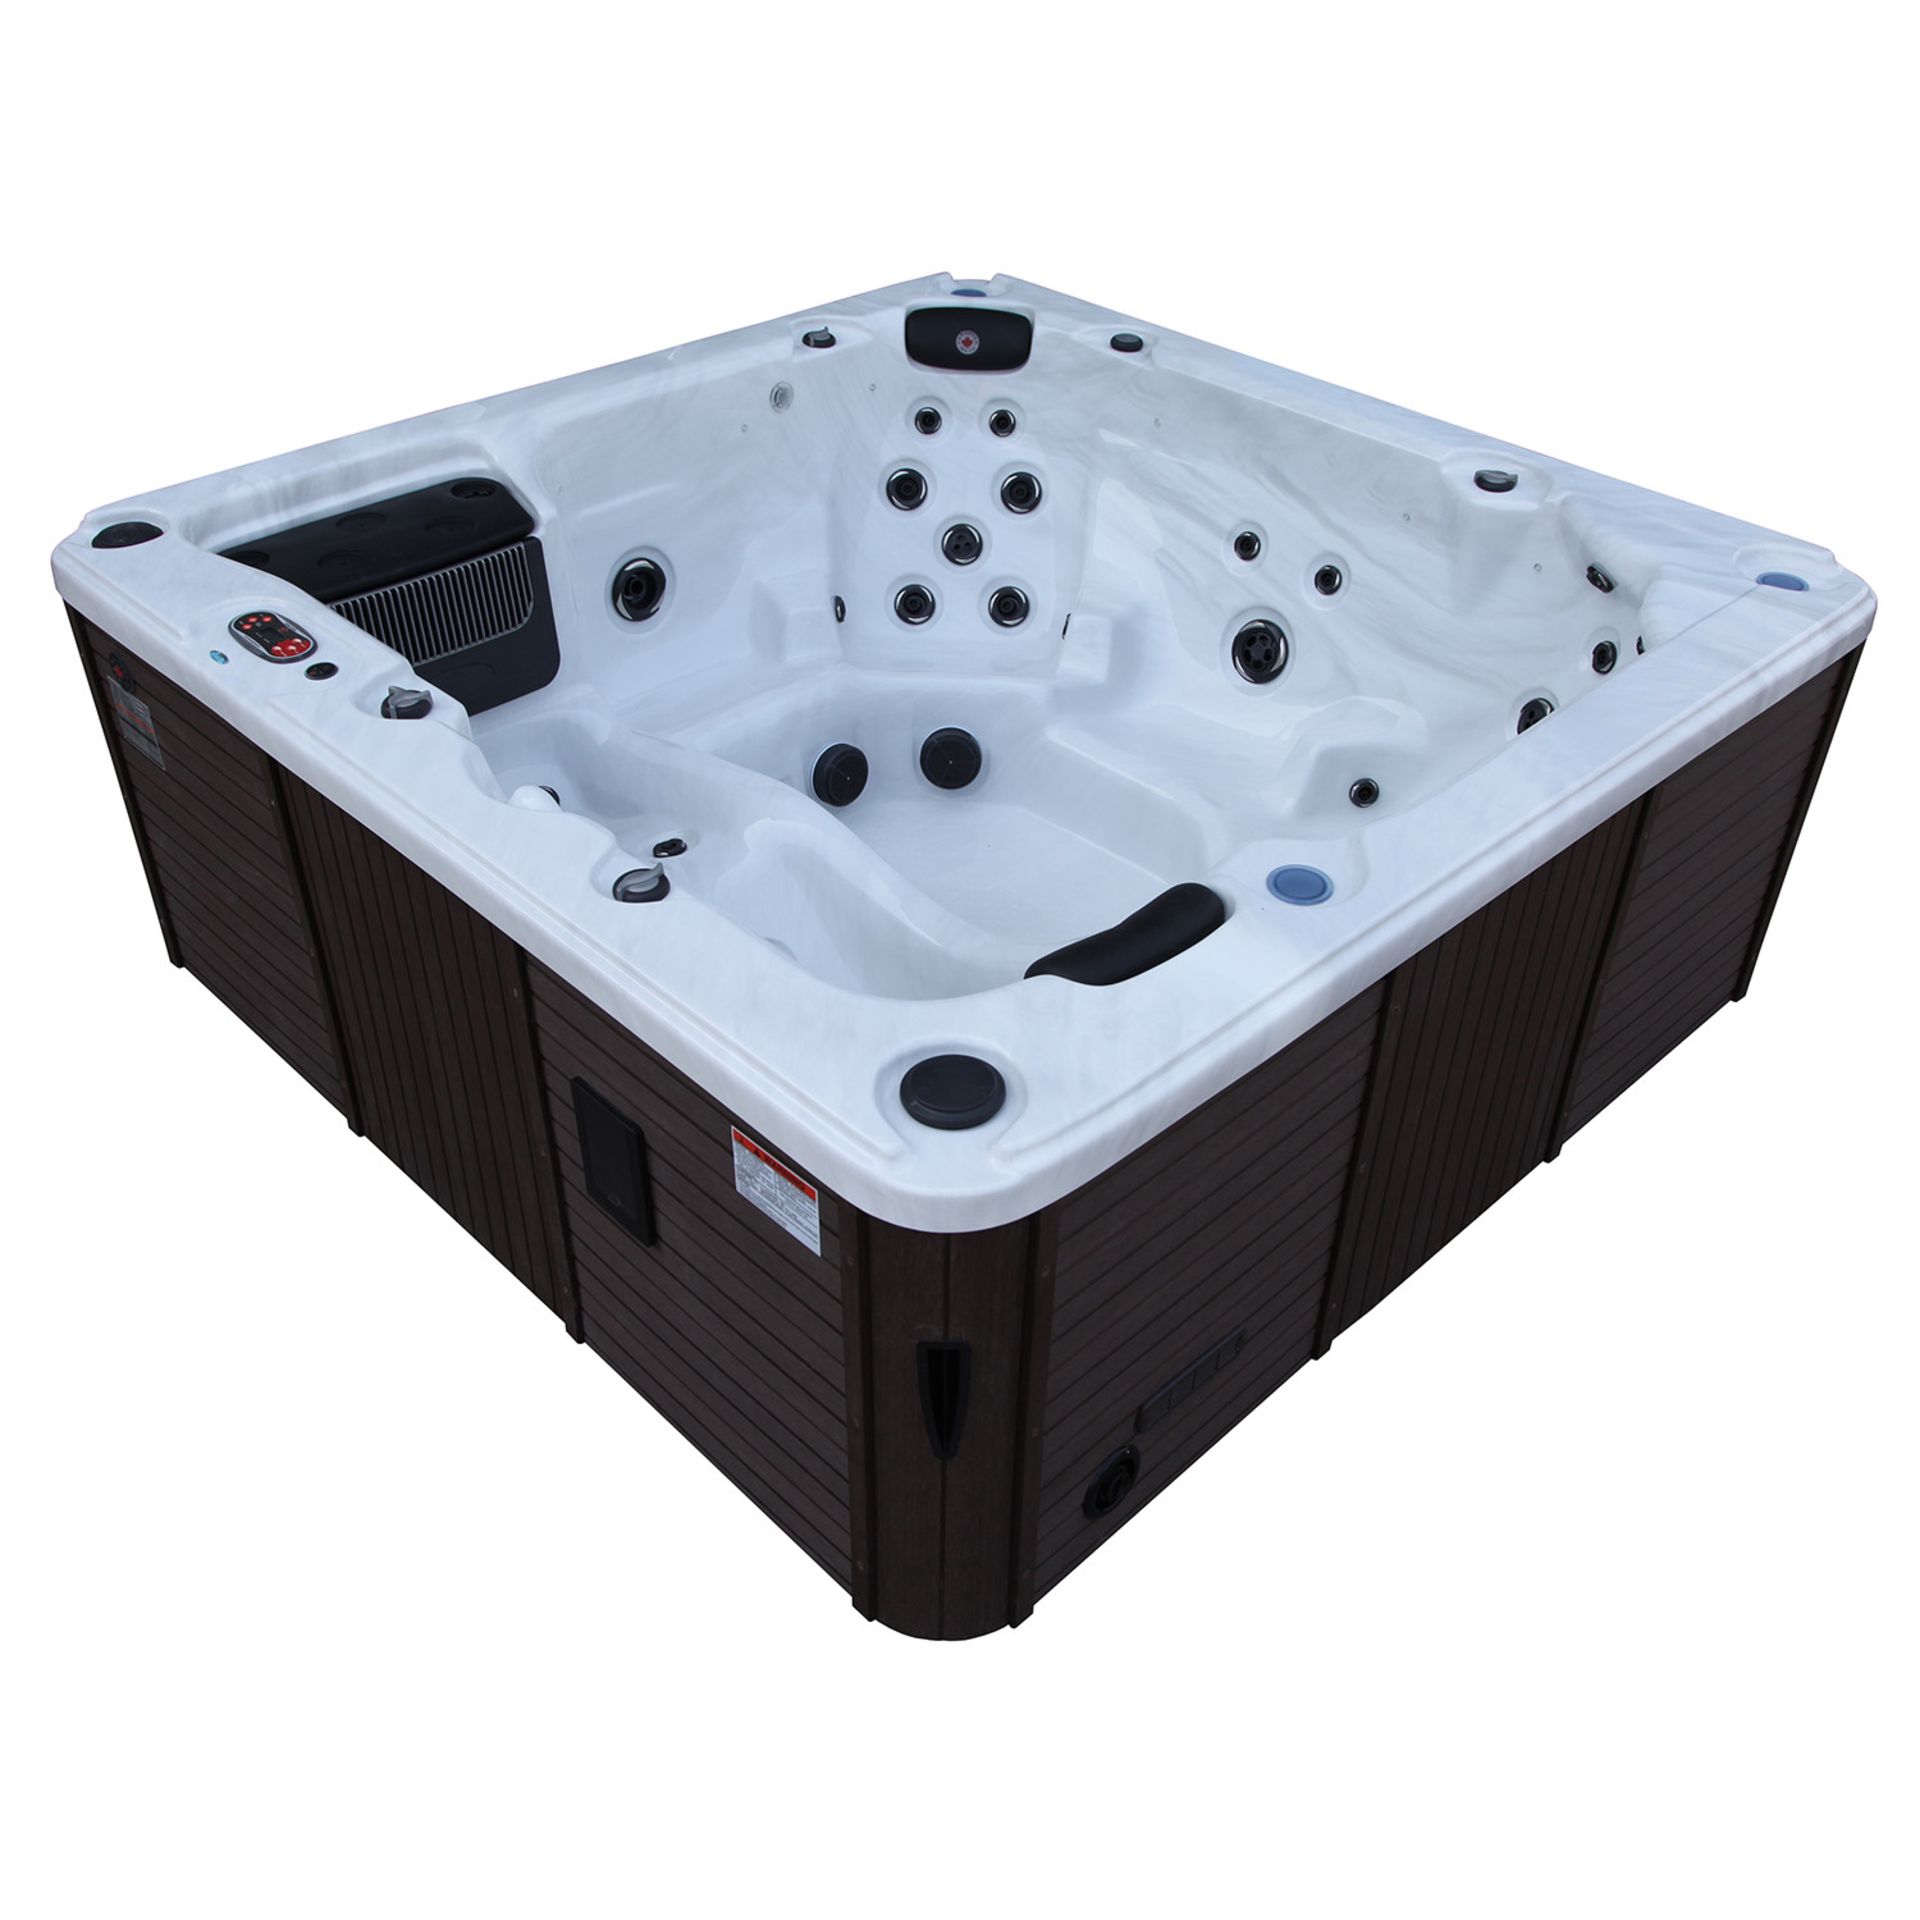 1 CANADIAN SPA THUNDER BAY 44 JET 6 PERSON SPA RRP Â£7999 (GENERIC IMAGE GUIDE)